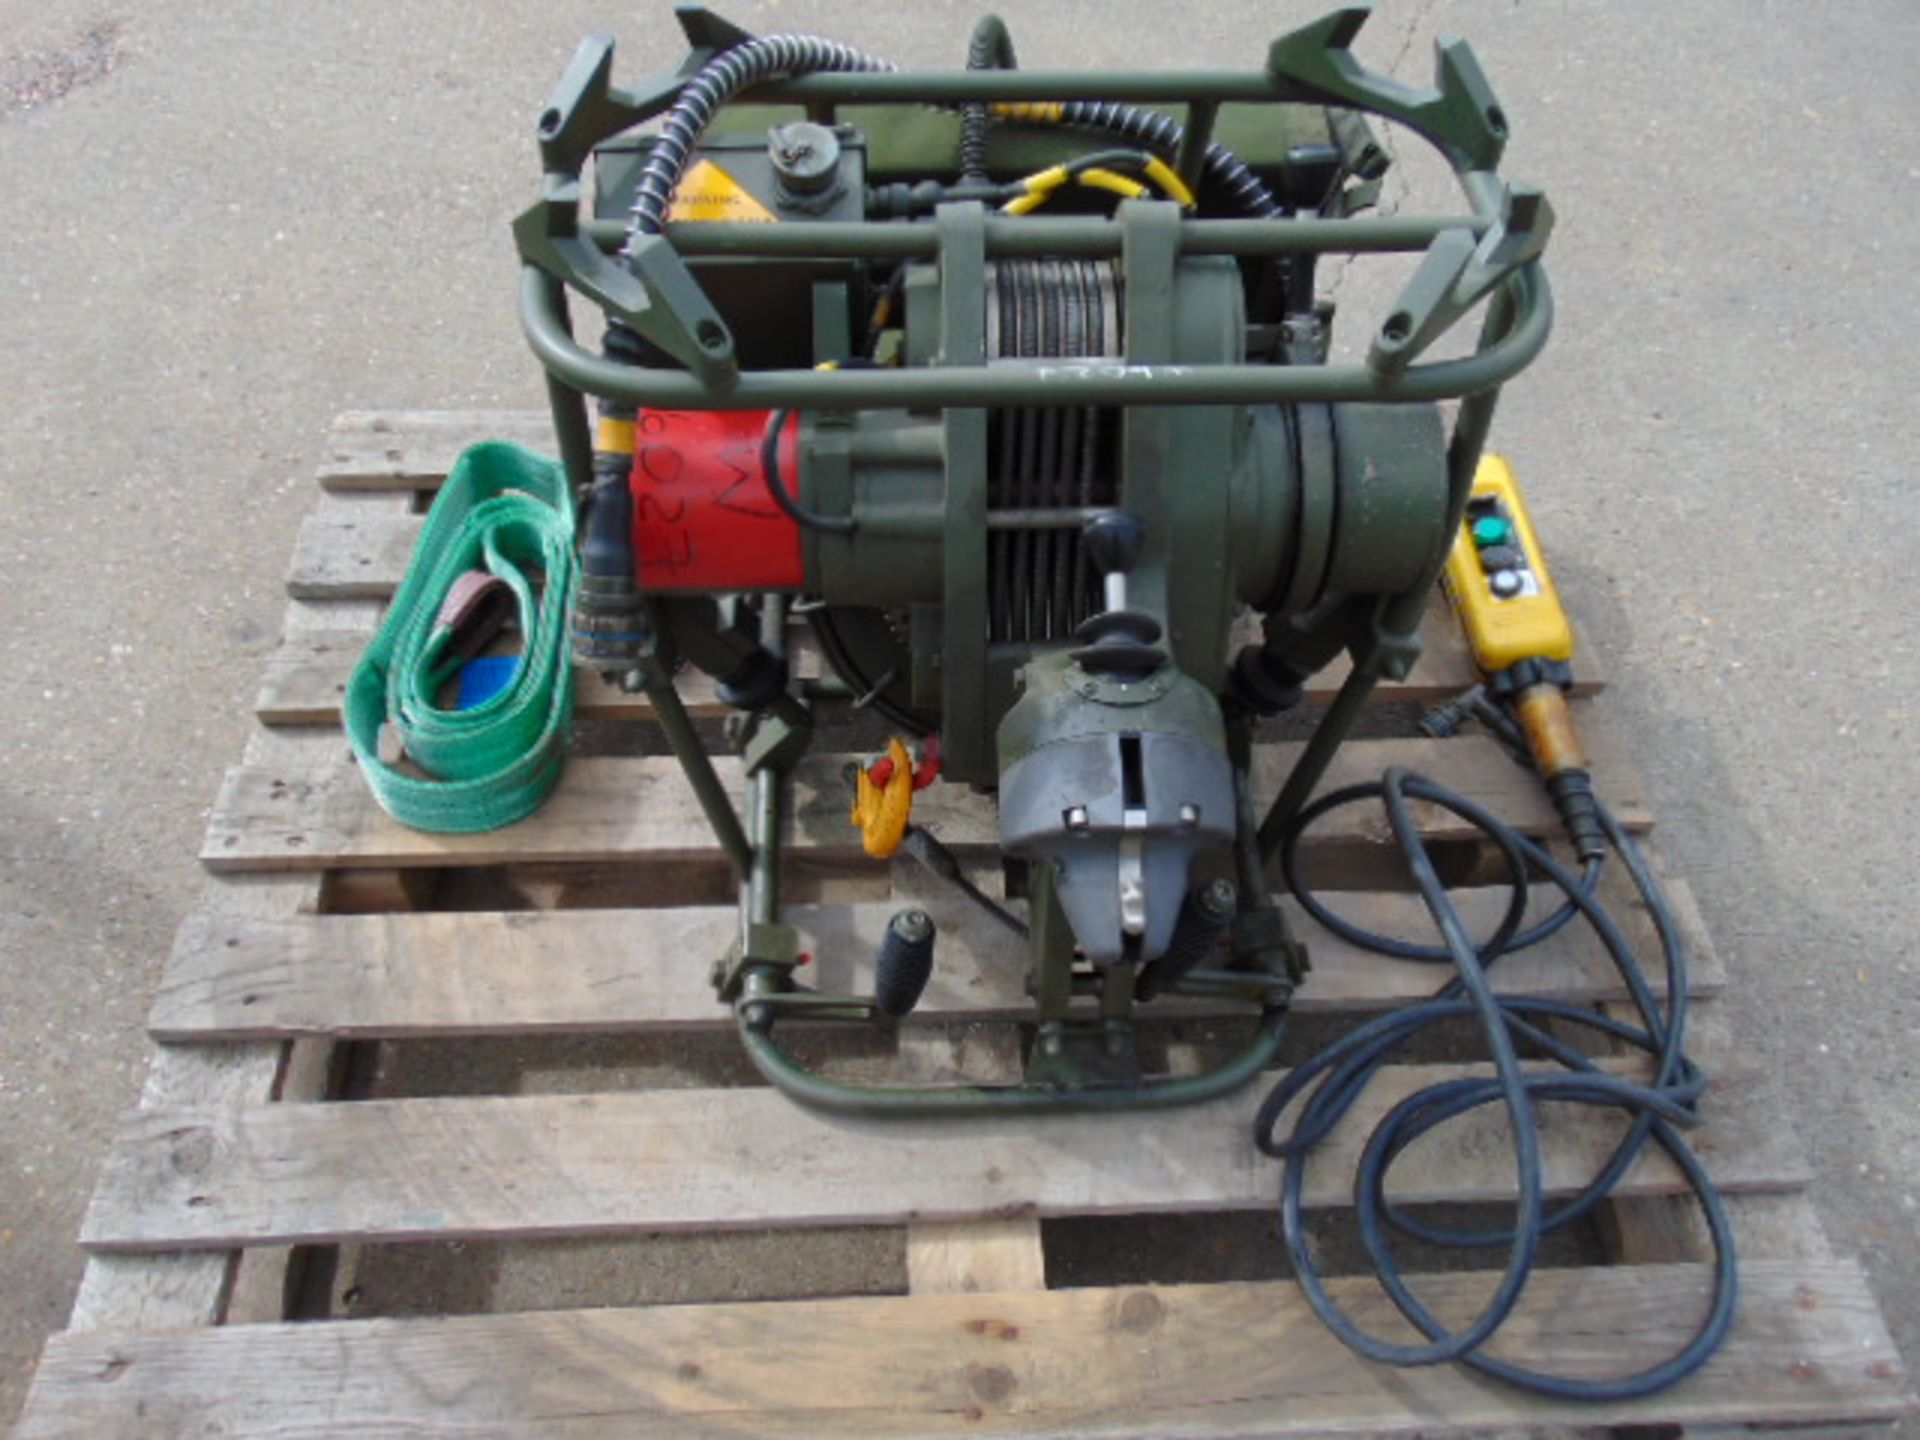 Unissued Demountable Recovery Winch Assembly c/w remote control and accessories from the UK MOD. - Image 3 of 8